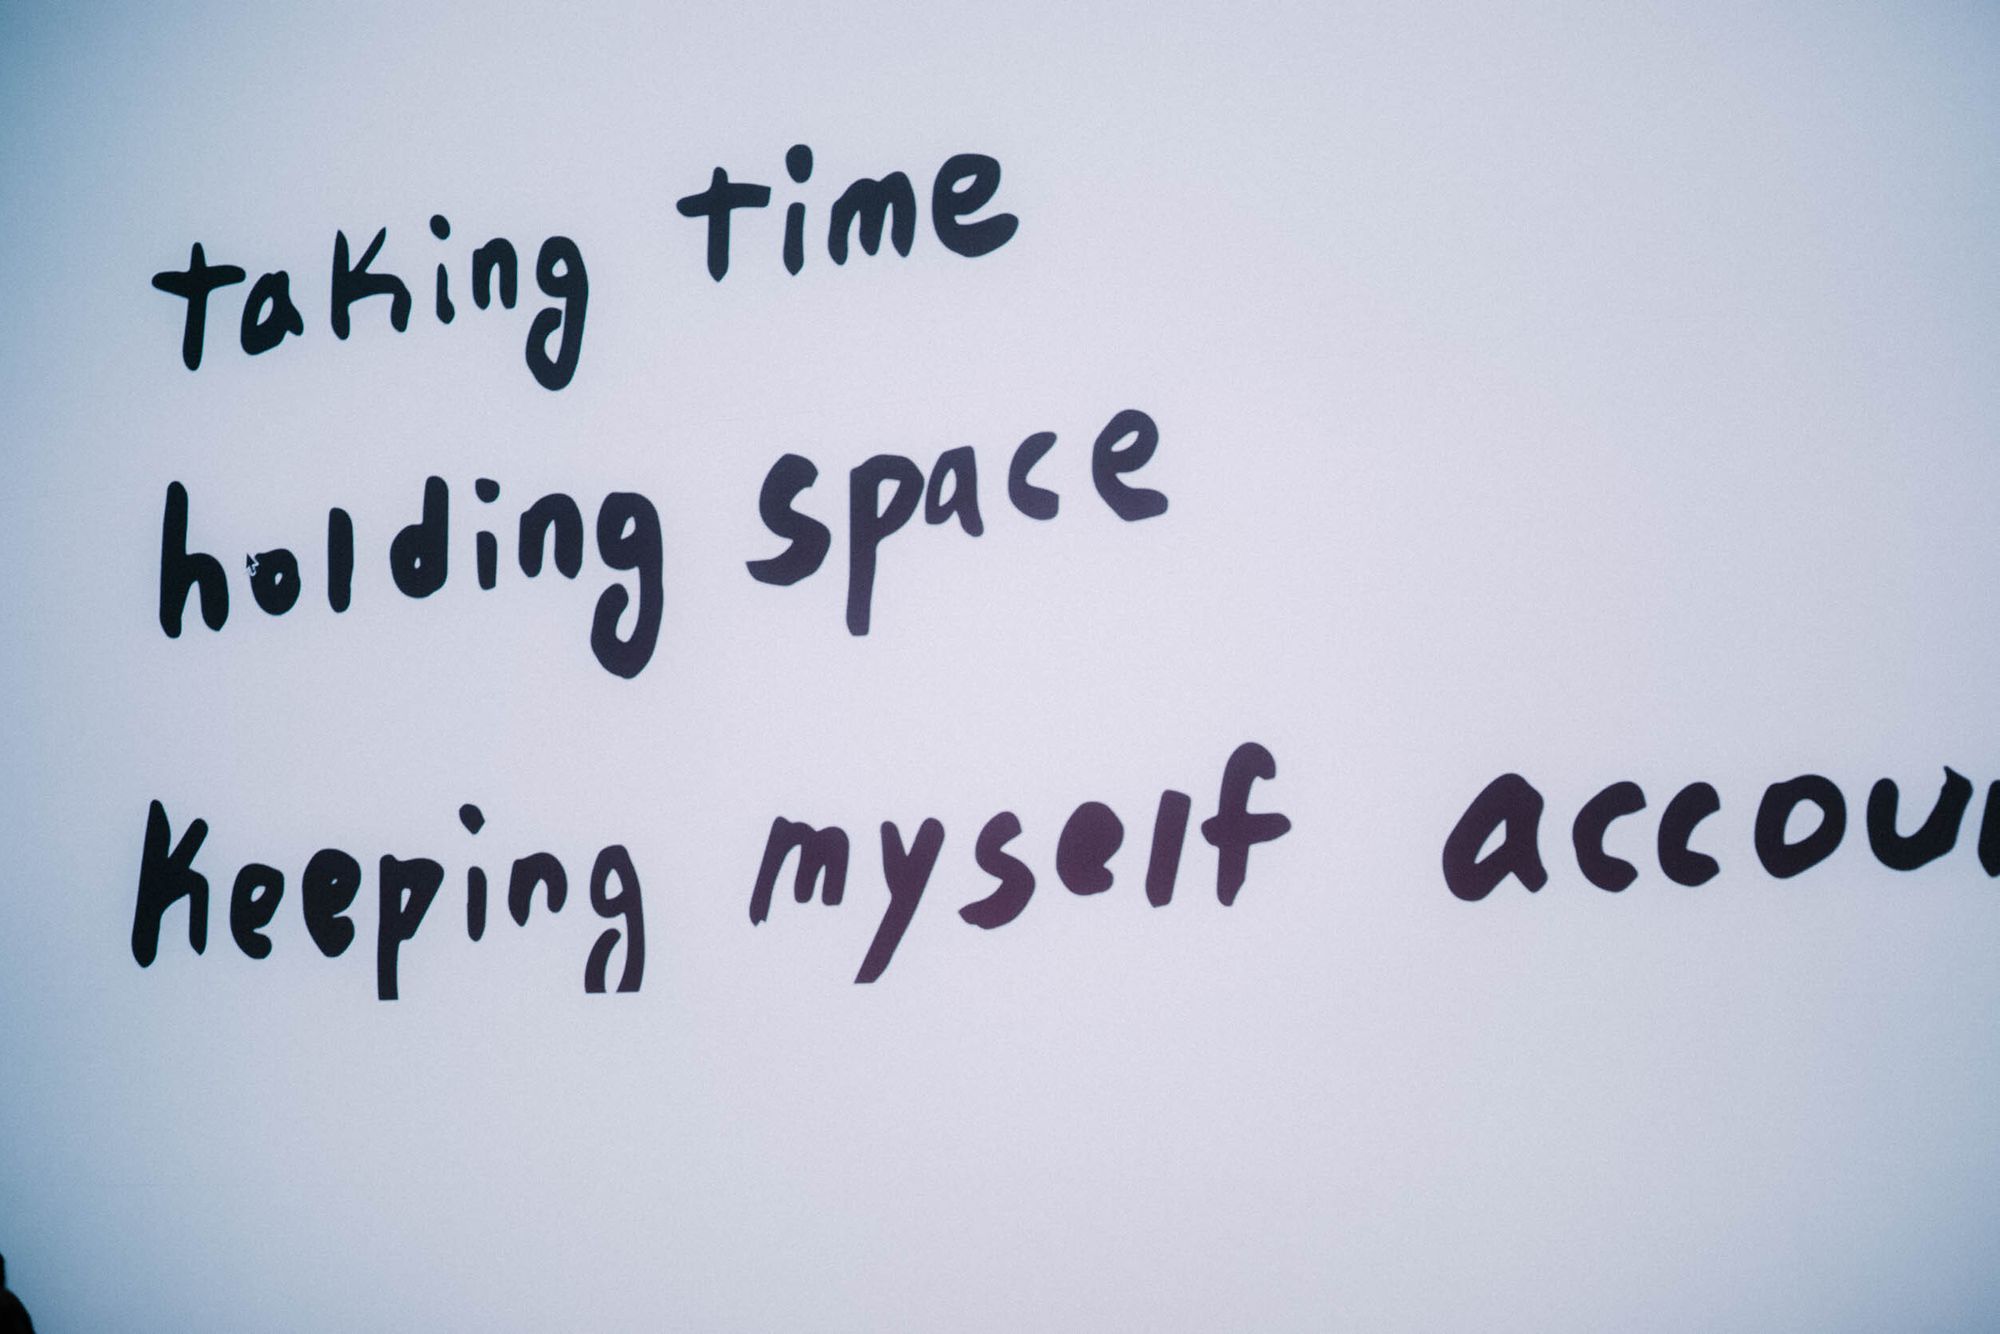 Black writing on a grey background says, "taking time, holding space, keeping myself accountable."